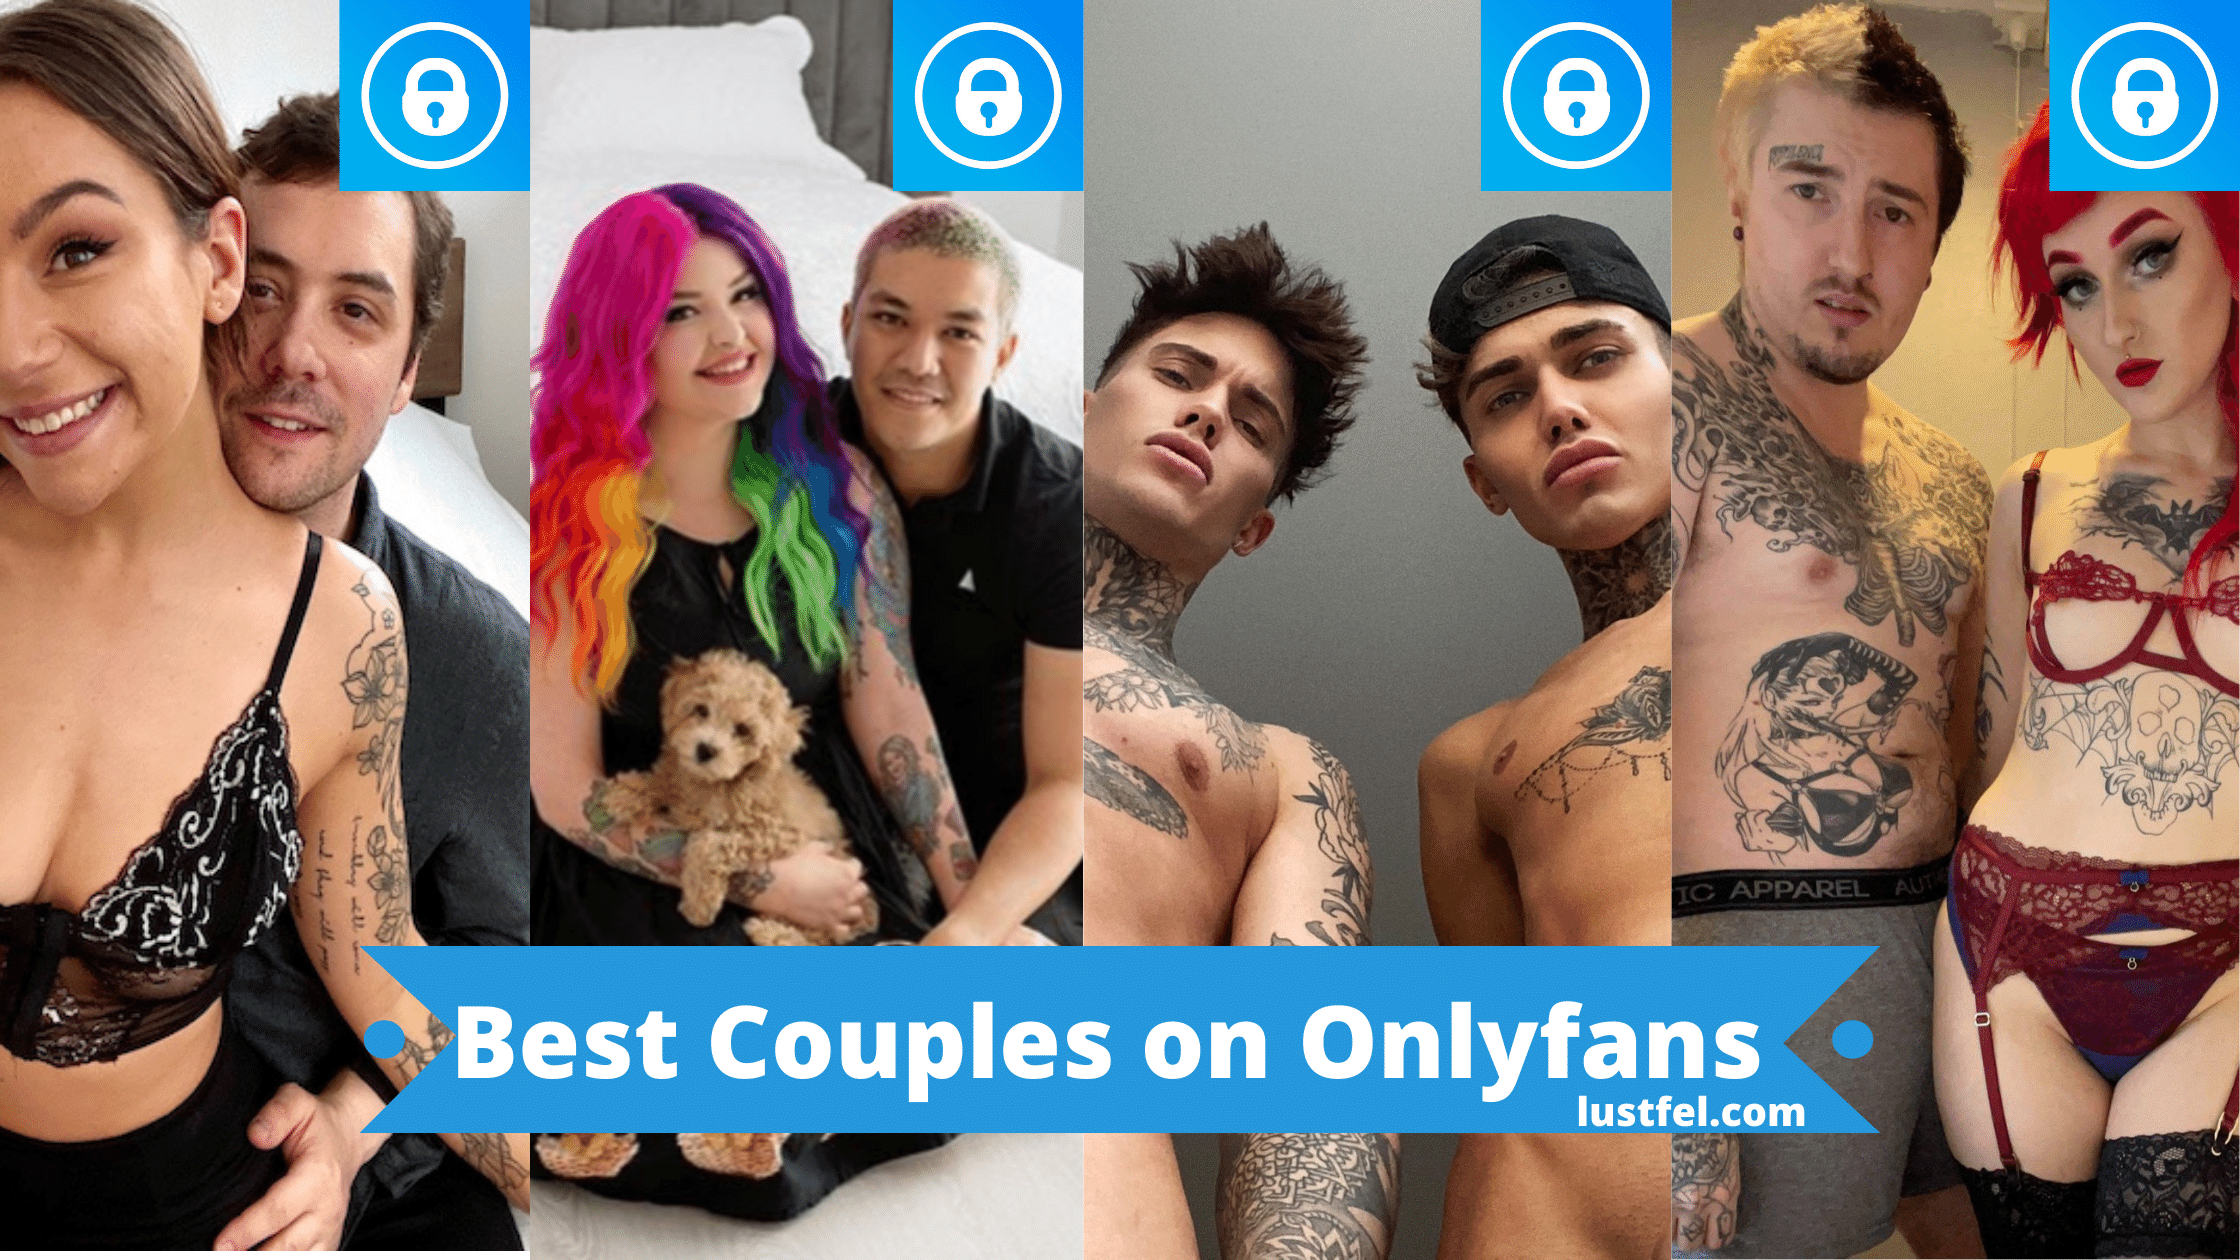 The anonymous couple nude onlyfans xxx premium porn videos